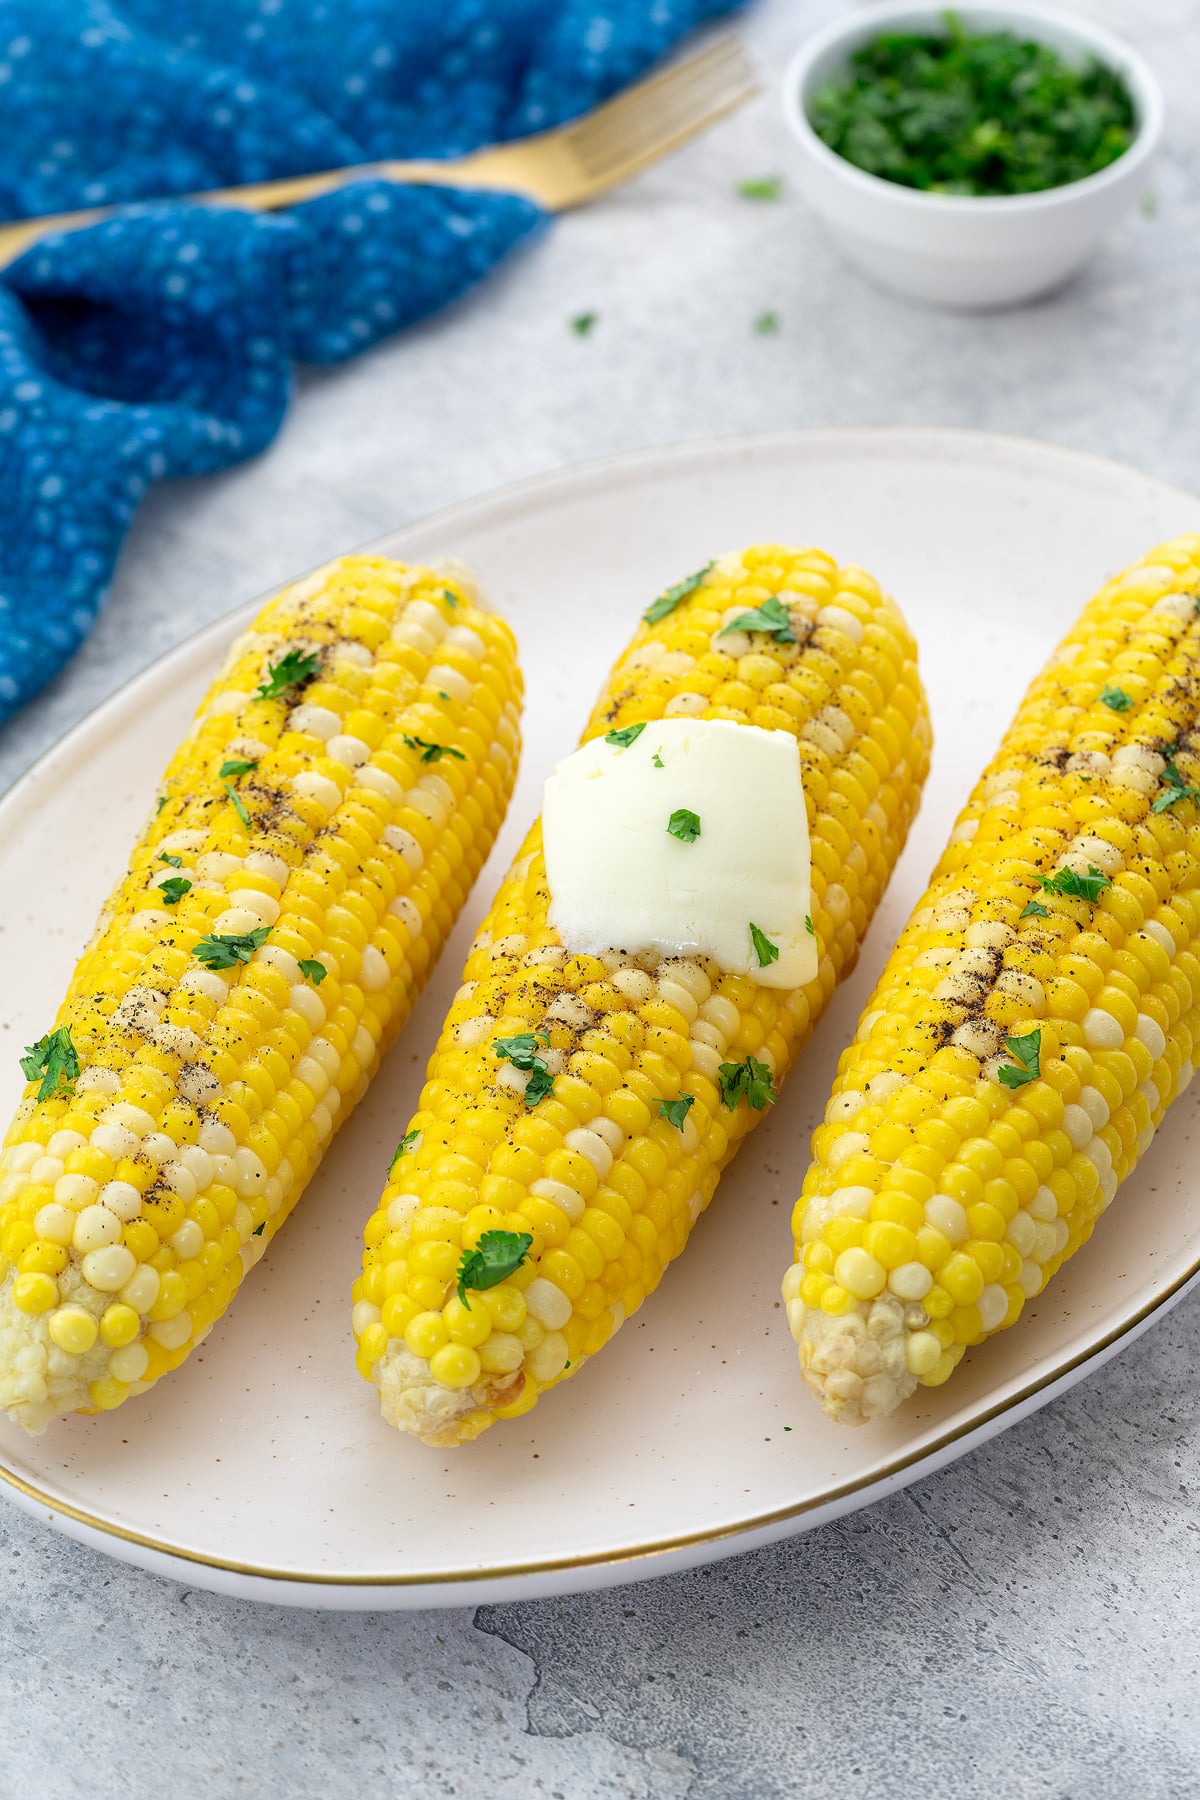 Boiled corn on the cob on an oval plate on a white table. Surrounding items include a blue towel, a golden fork, and a cup of cilantro.